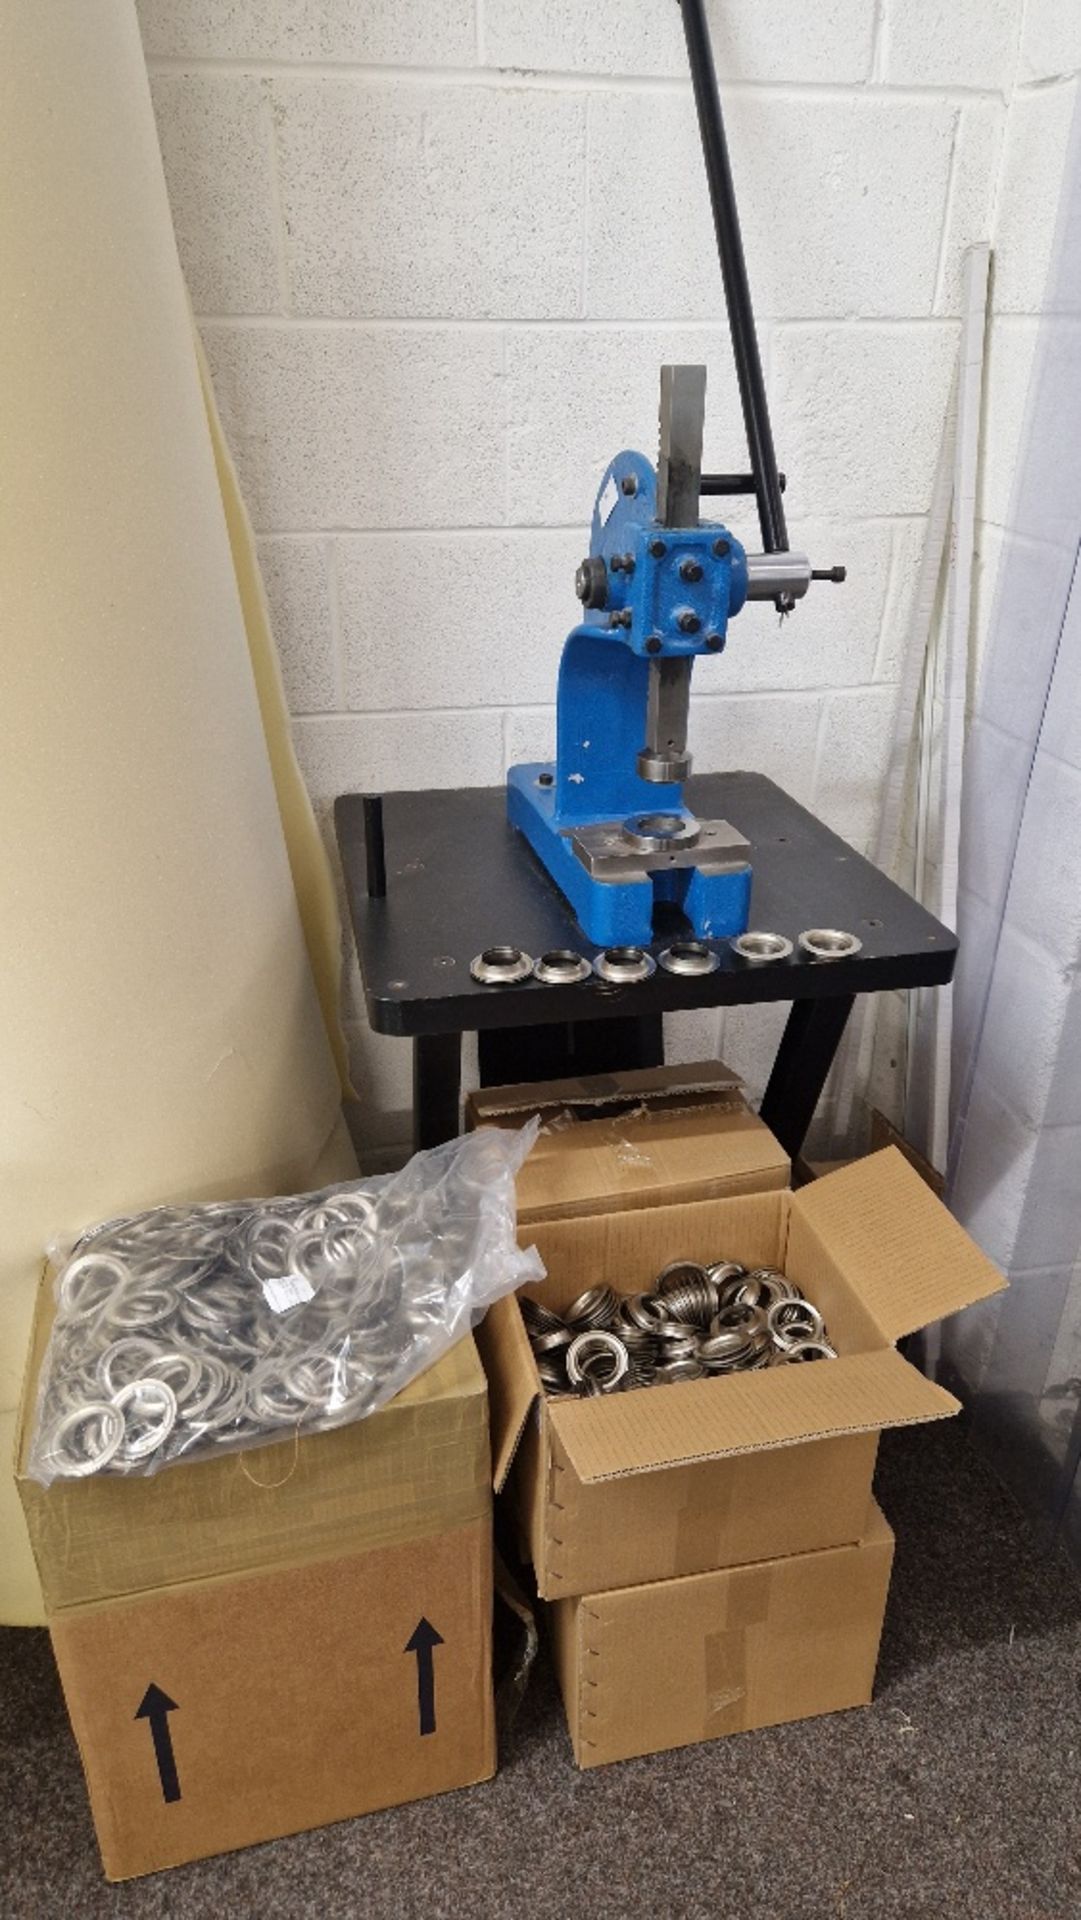 HAND OPERATED EYELET PRESS WITH 200 CHROME CURTAIN EYELETS *** PLEASE NOTE: ASSETS ARE LOCATED